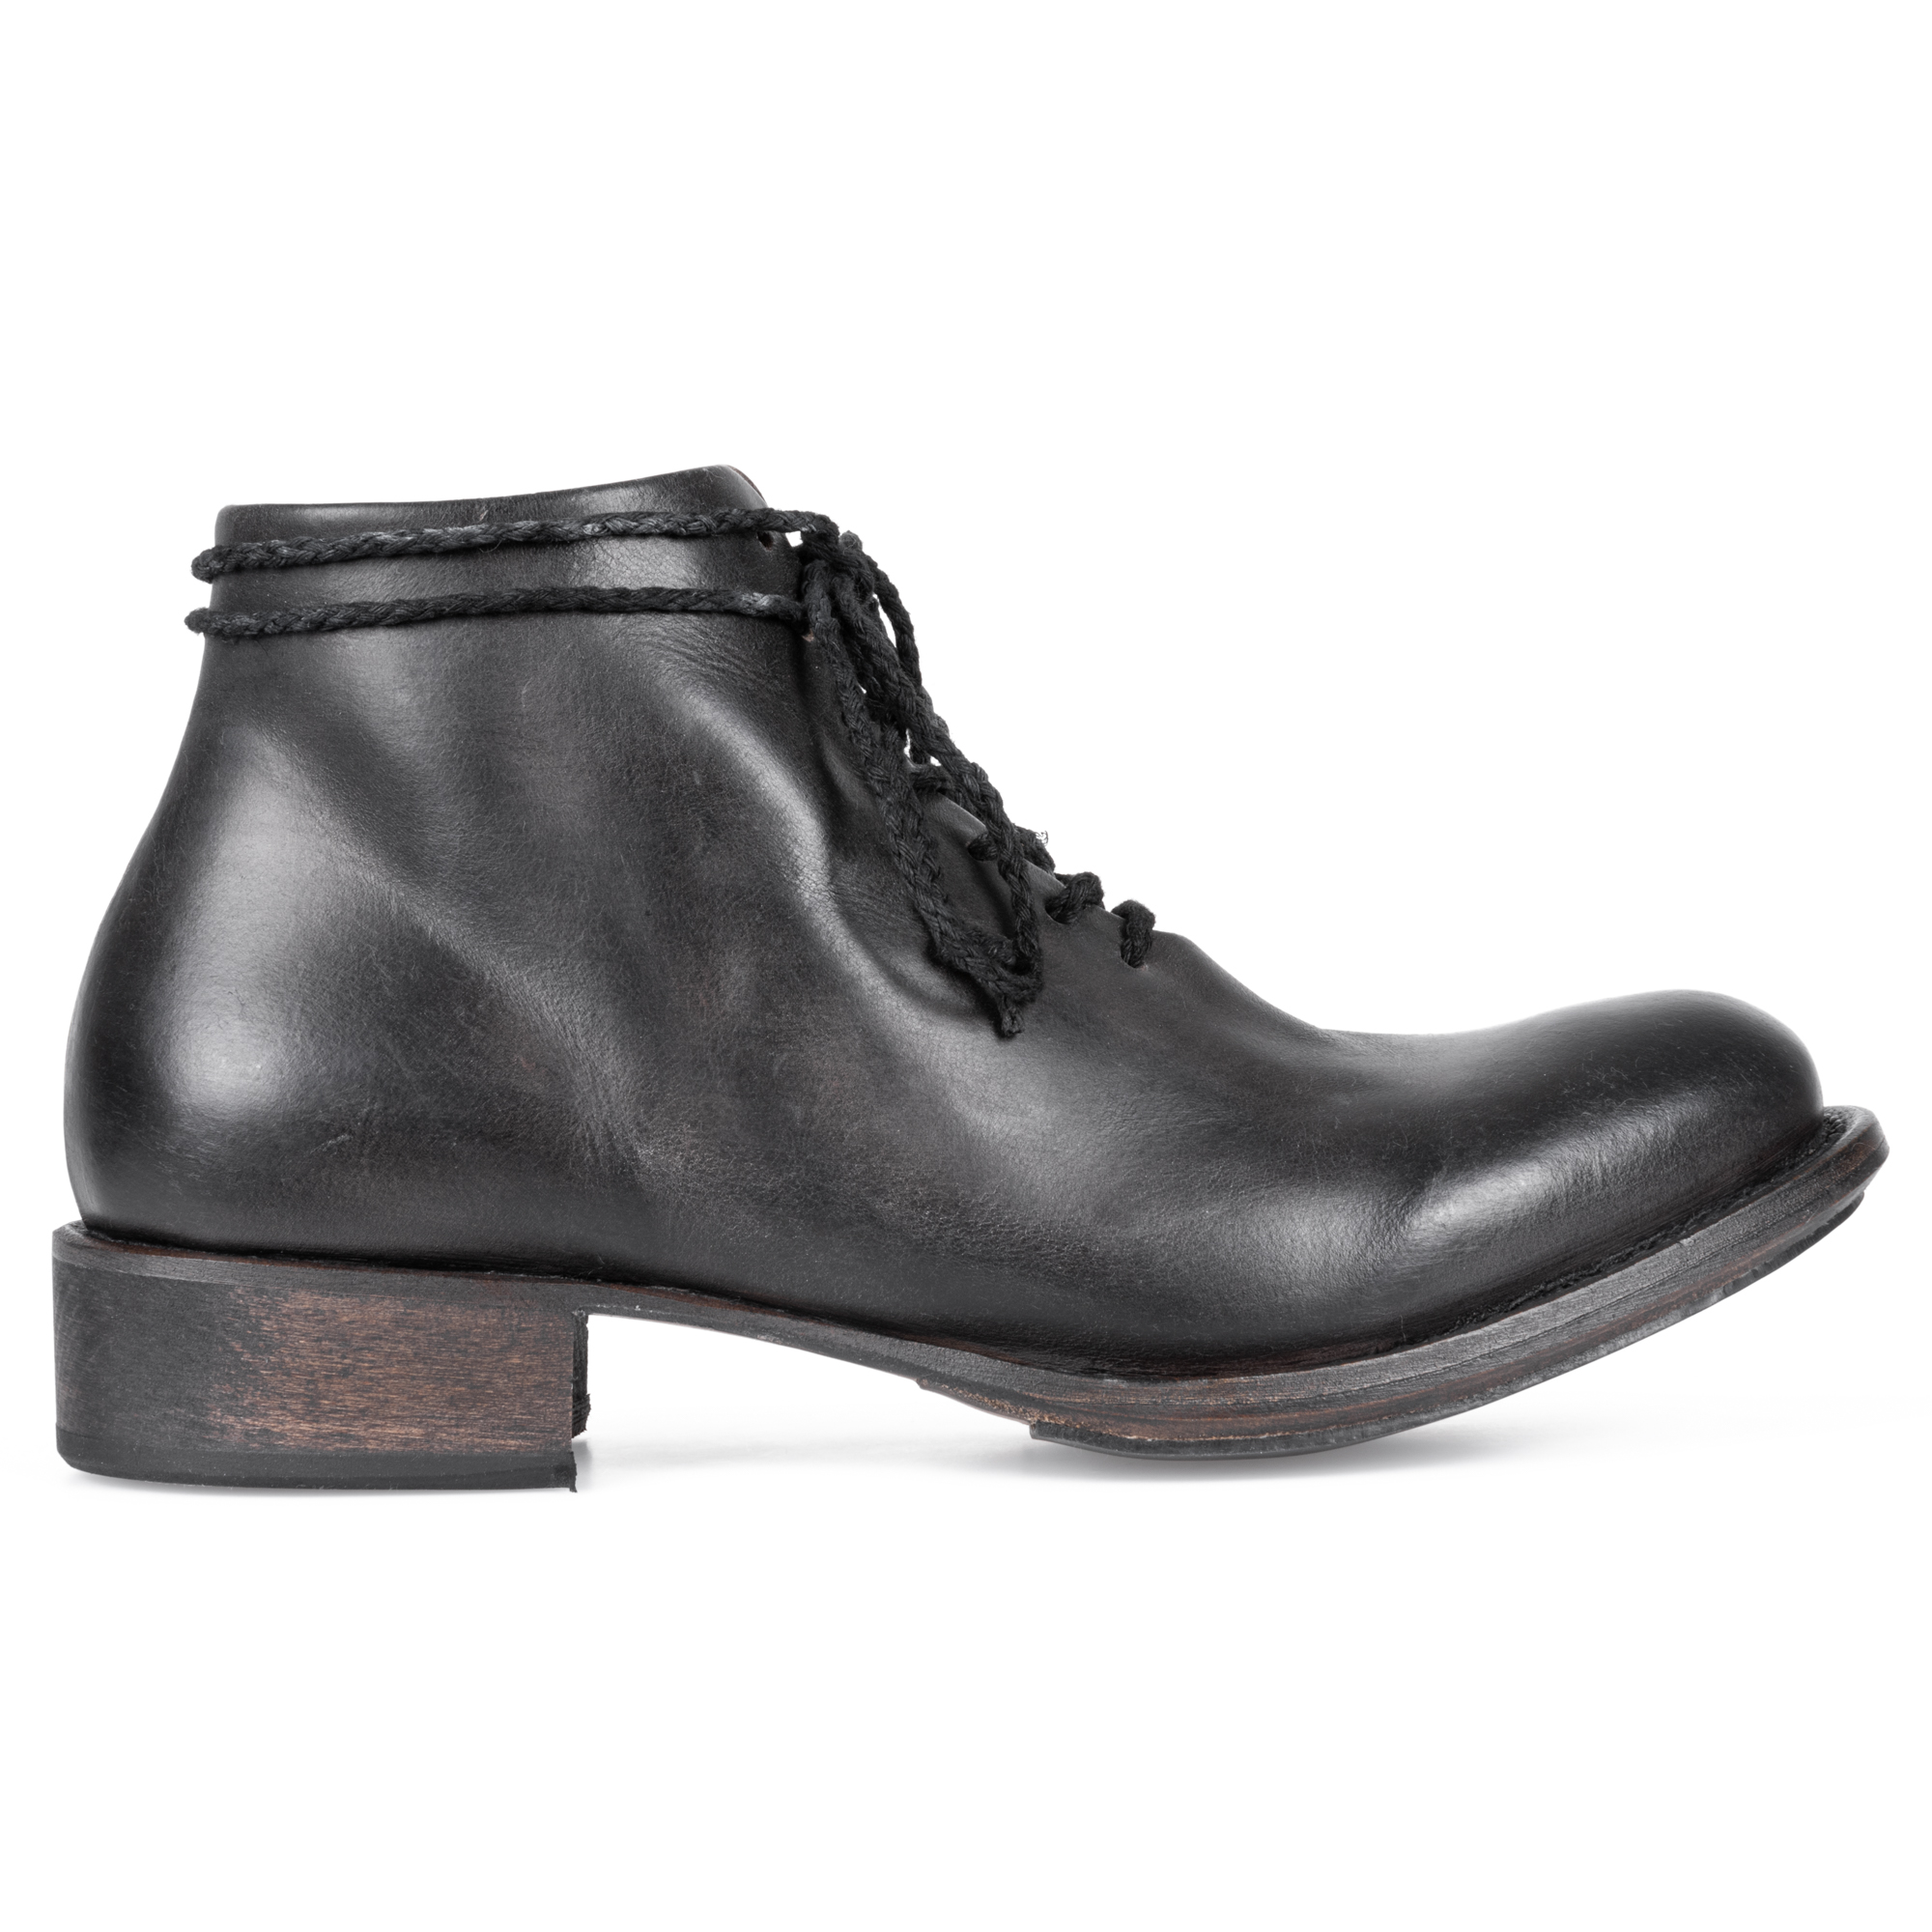 BLACK WAXED LACE UP BOOTS|wolfensson